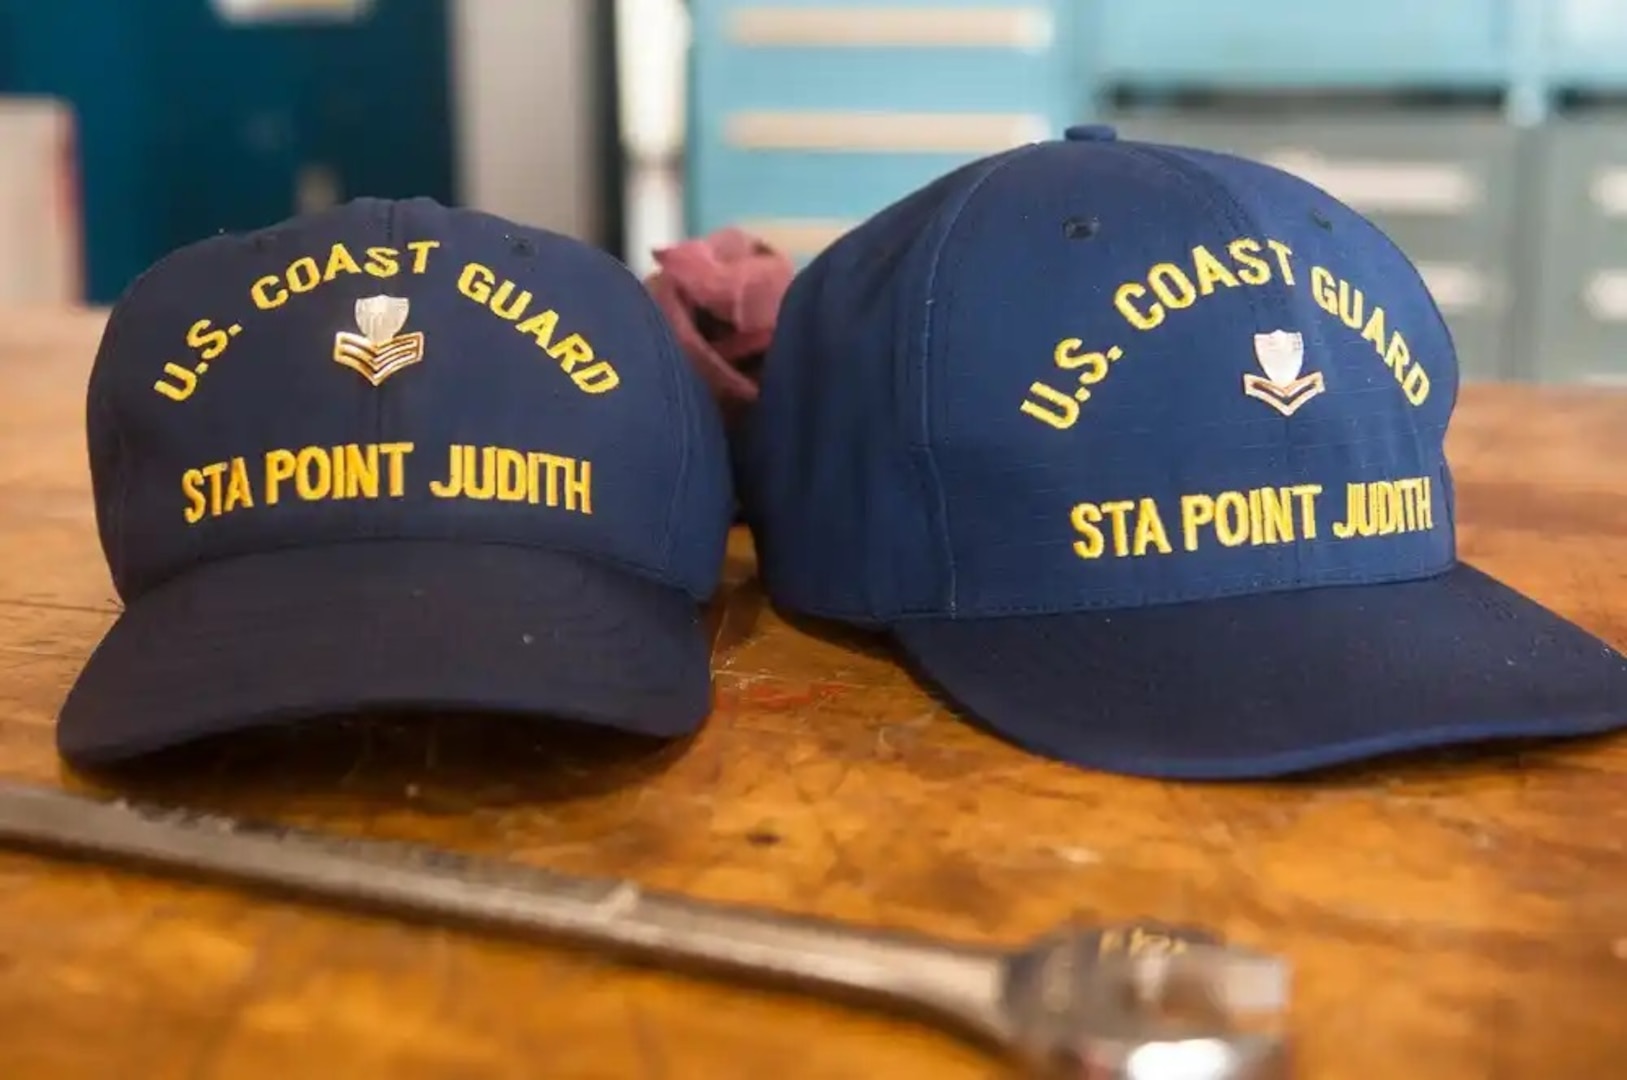 New insignia for Coast Guard covers lay pinned on a work bench after an advancement ceremony at Station Point Judith in Narragansett, R.I., Sept. 2, 2015. Petty Officer 1st Class Will Mudloff and Petty Officer 2nd Class Alan Freedman were advanced to their next respective pay grade. (U.S. Coast Guard photo by Petty Officer 3rd Class Ross Ruddell)